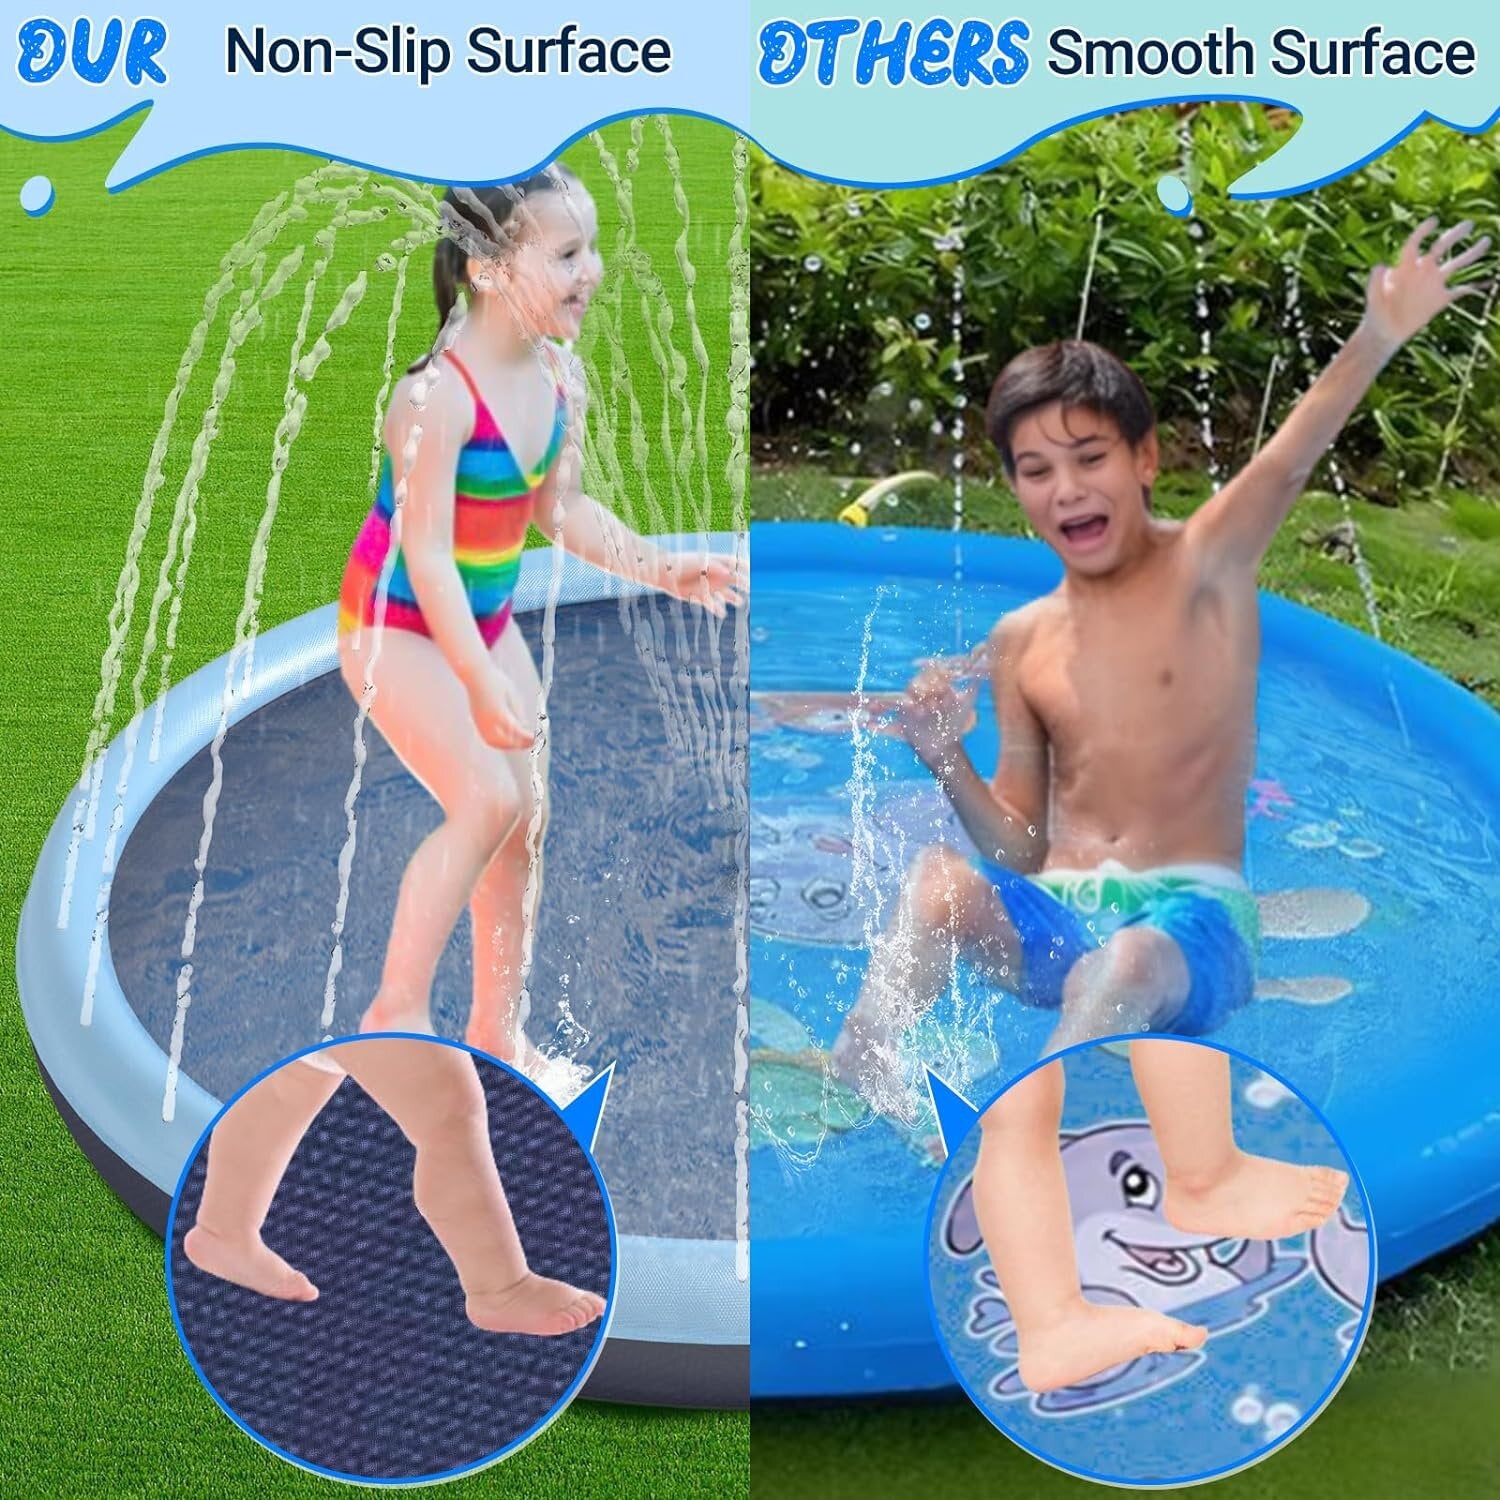 👍NON-SLIP DESIGN: When playing with water on splash mat, 4-8 ages children are easy to fall and be injured. The non-slip texture is designed to increase grip and allow children to enjoy the water Sprinkler in the backyard while ensuring safety.